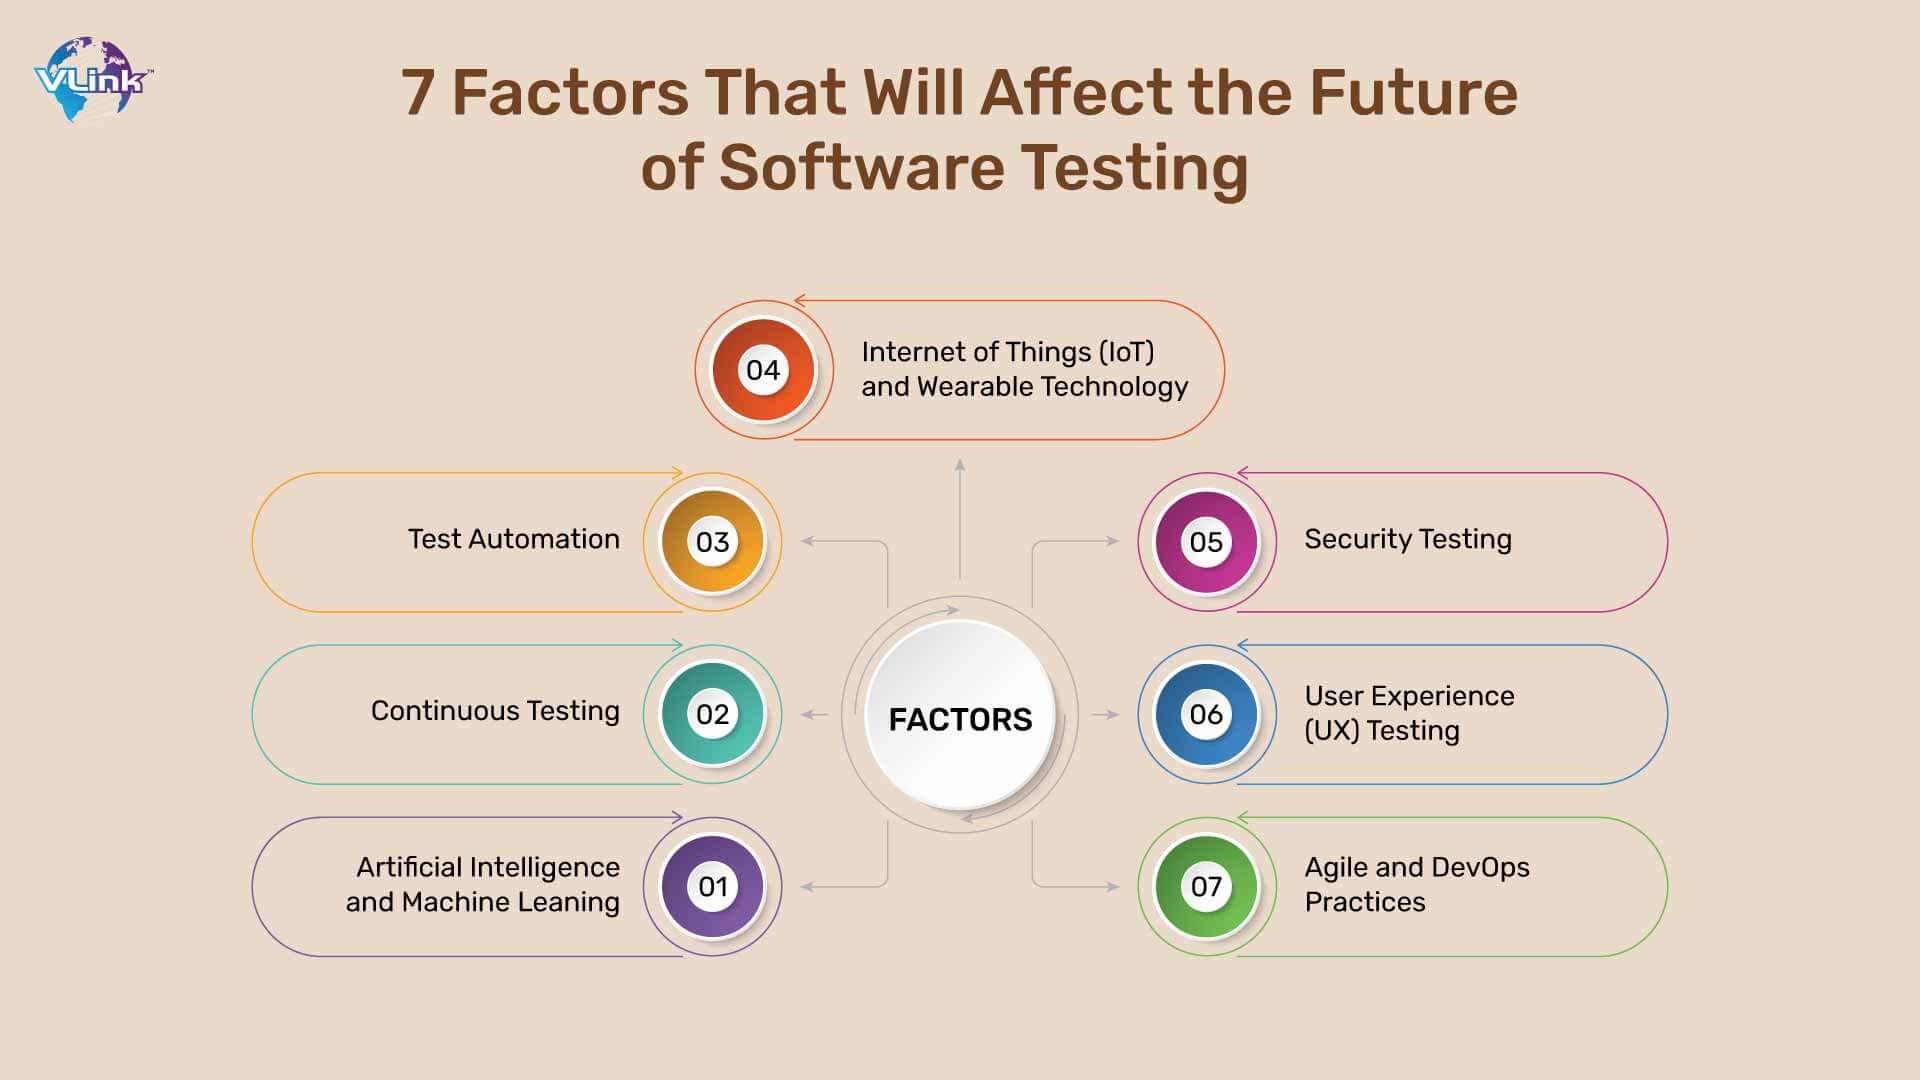 7 Factors That Will Affect the Future of Software Testing